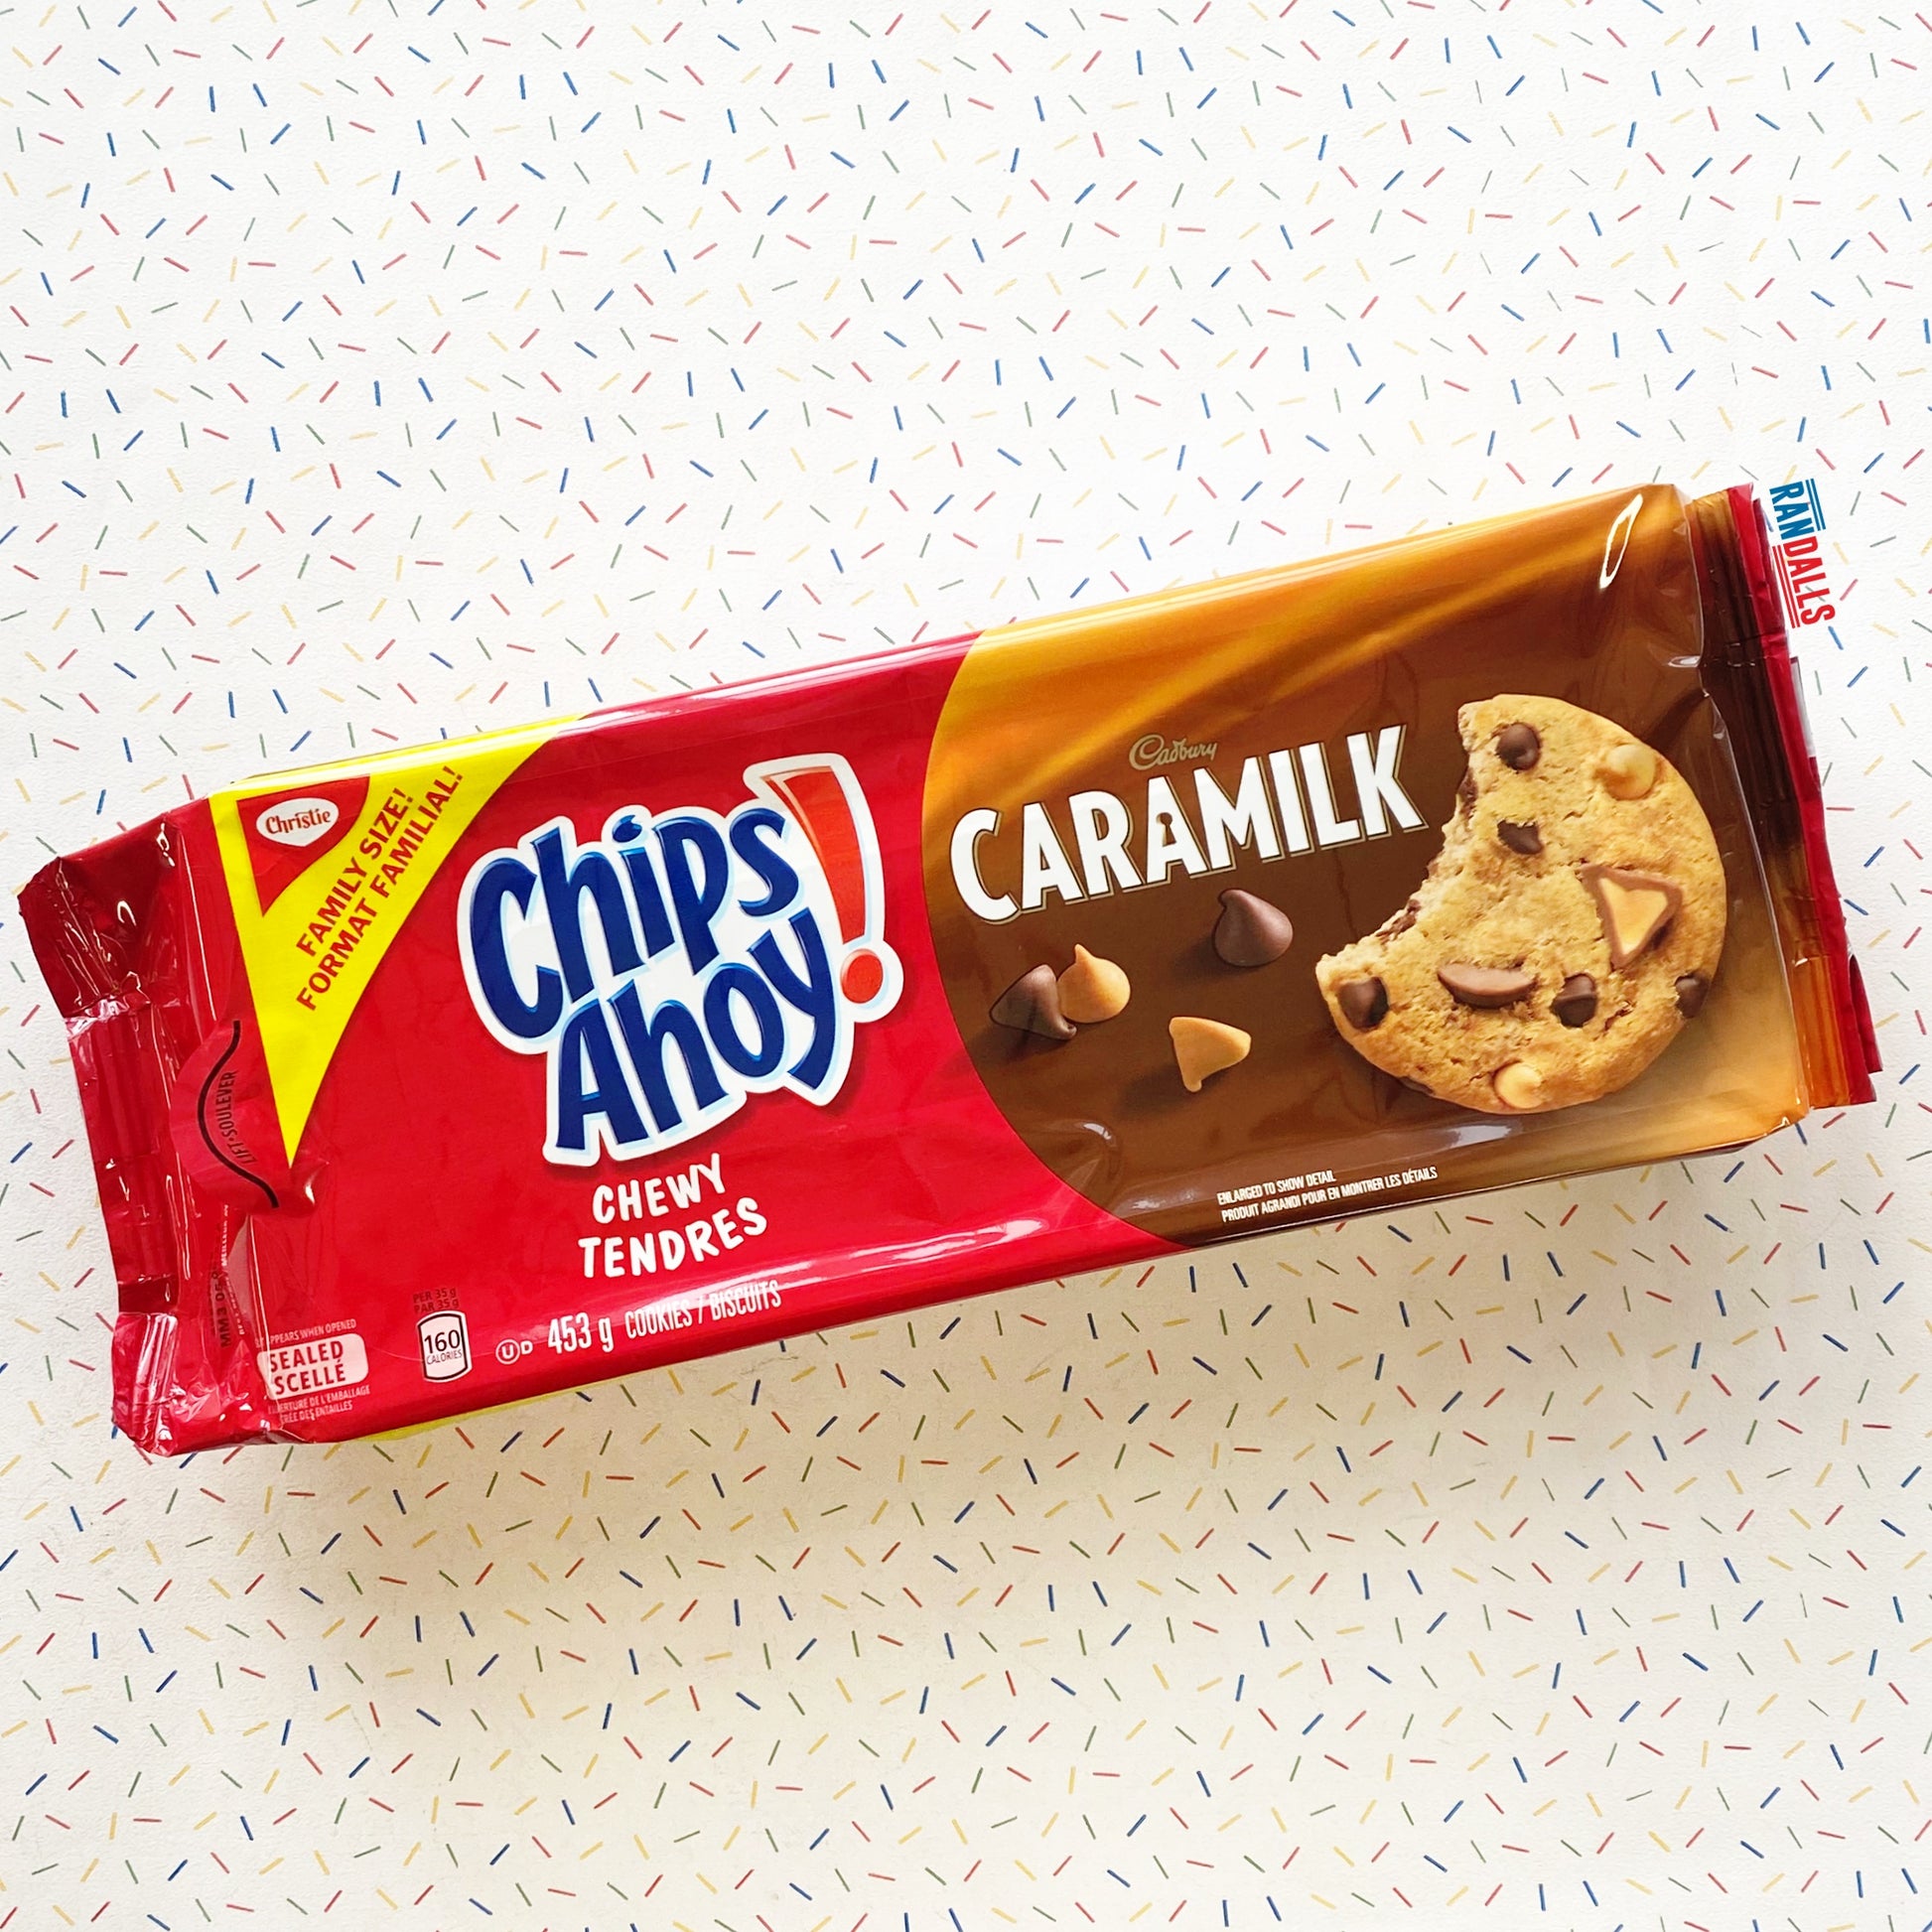 chips ahoy cookies, christie chips ahoy, nabisco chips ahoy, chewy cookies, cadbury caramilk, caramelised white chocolate, caramilk cookies, canadian cookies, biscuits, family size, canada, randalls,